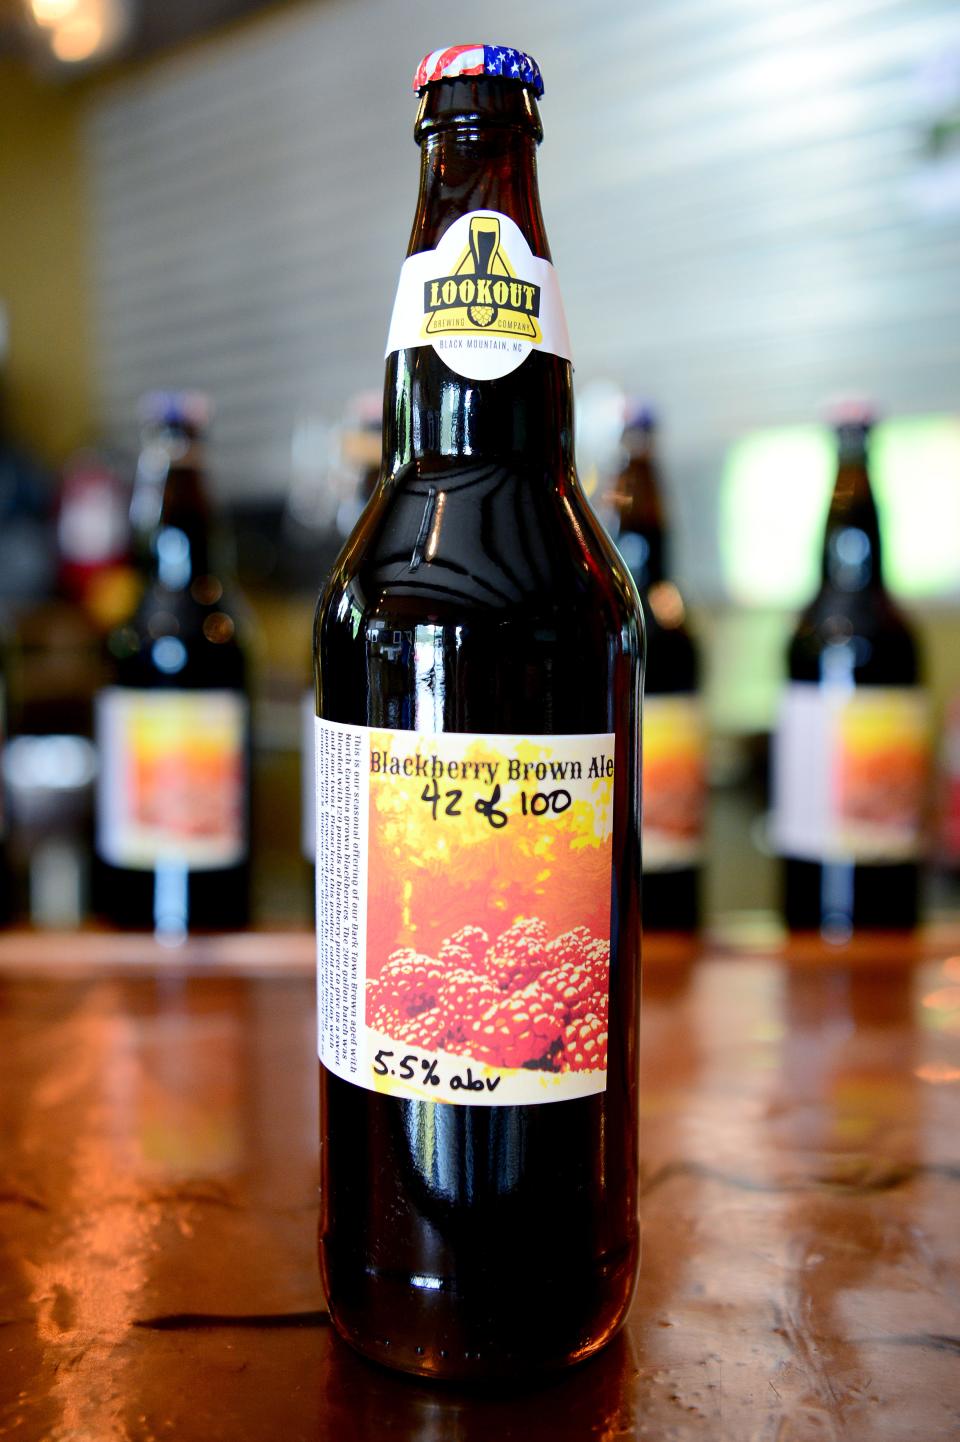 Limited edition Blackberry Brown Ale from a Lookout event.